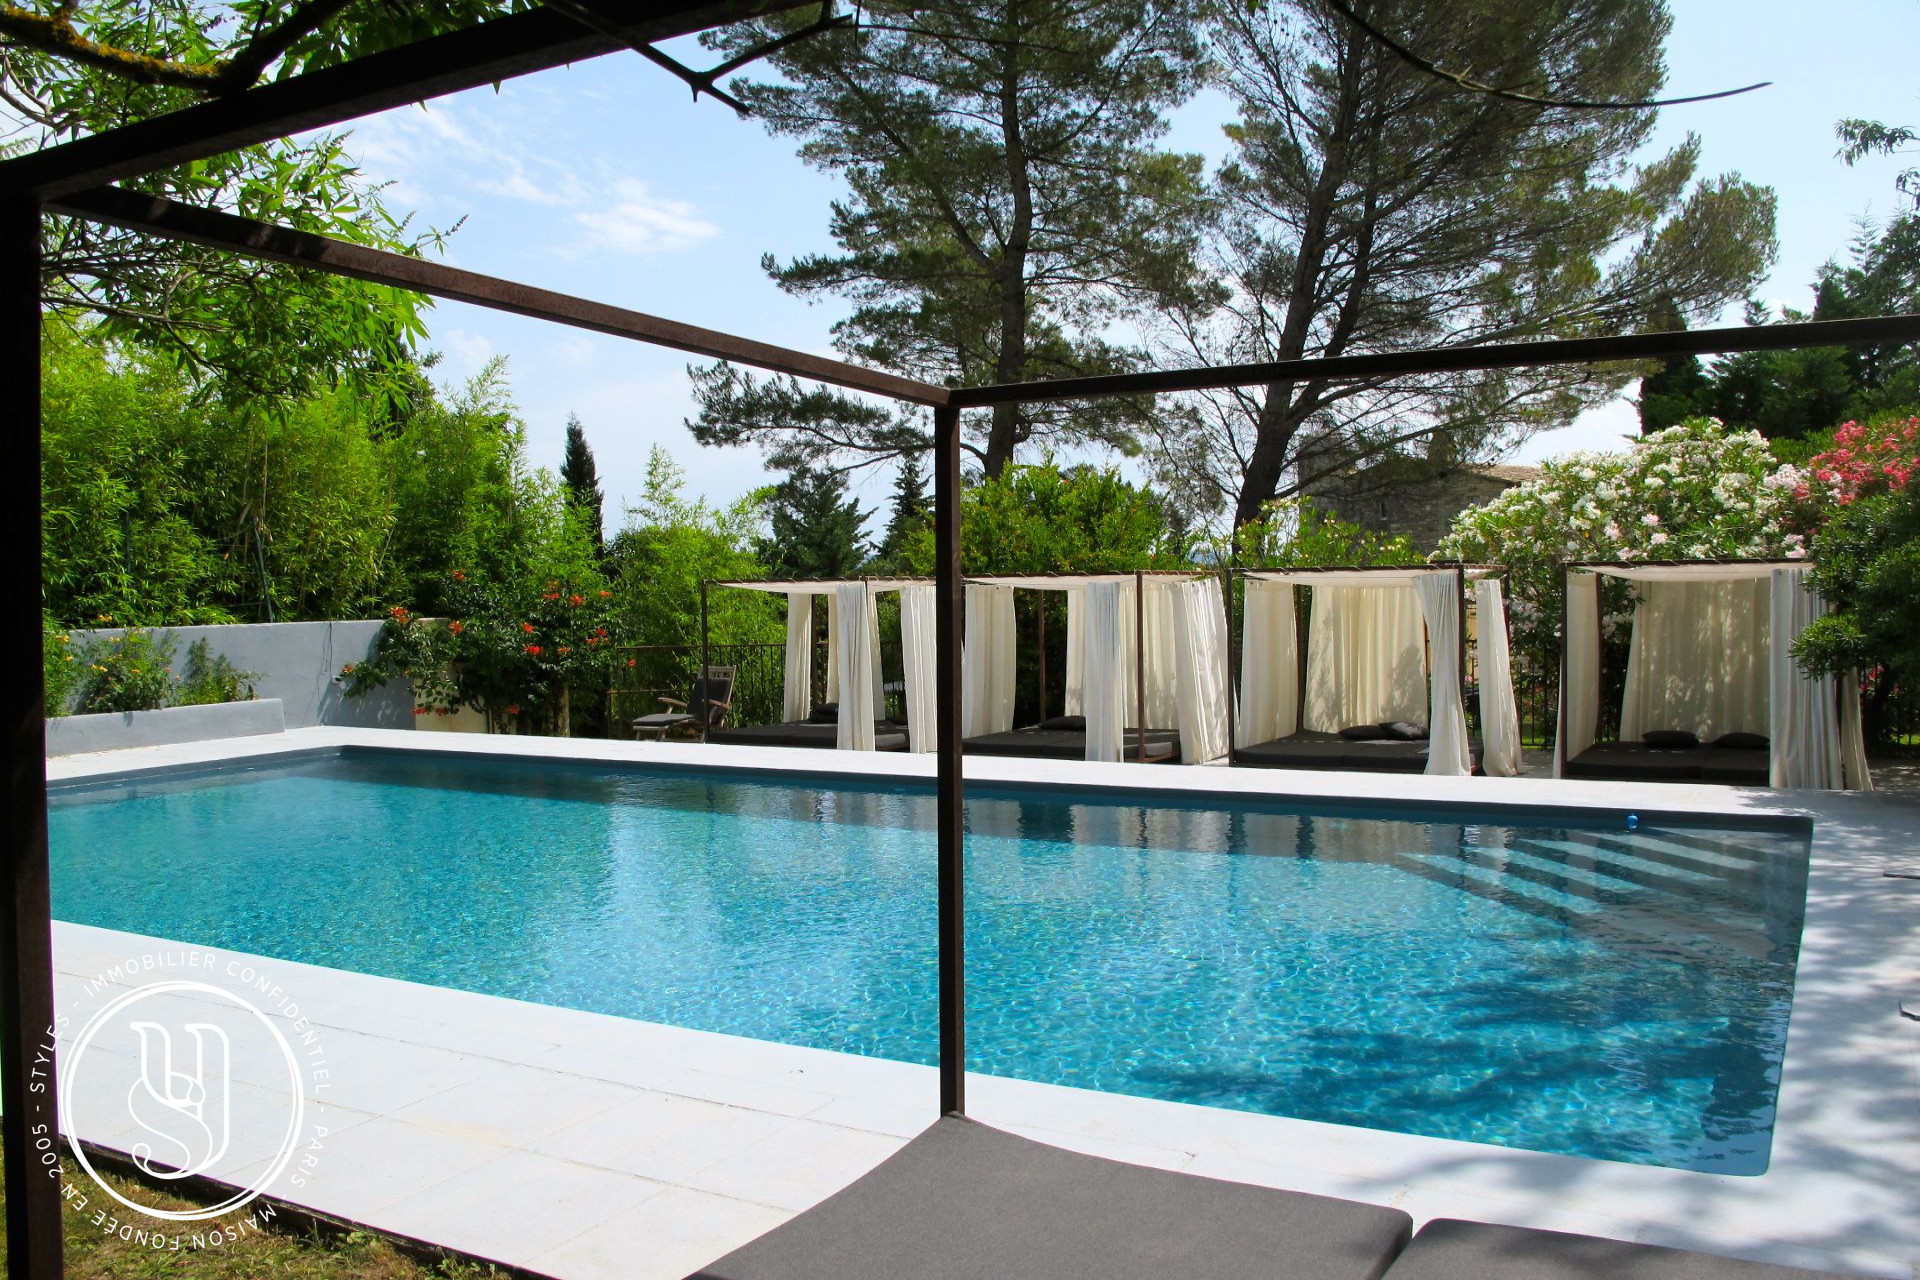 Uzès - Center, a unique property with panoramic views and character - image 2